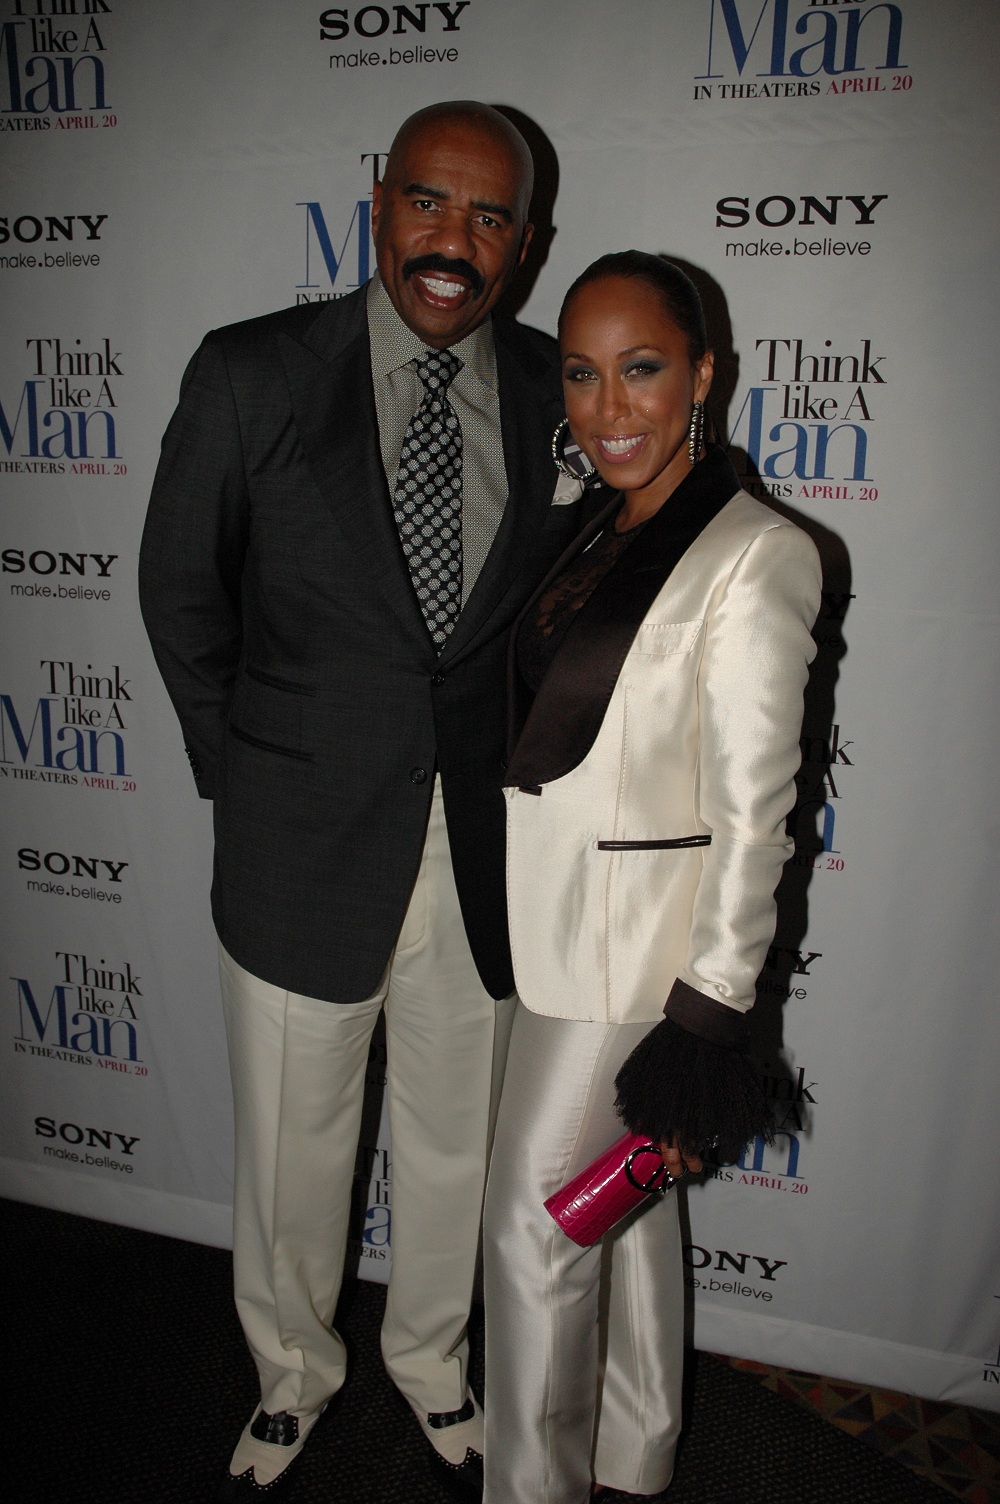 Steve Harvey with wife Marjorie rszd - "Think Like a Man" Makes Promotional Stop in NYC